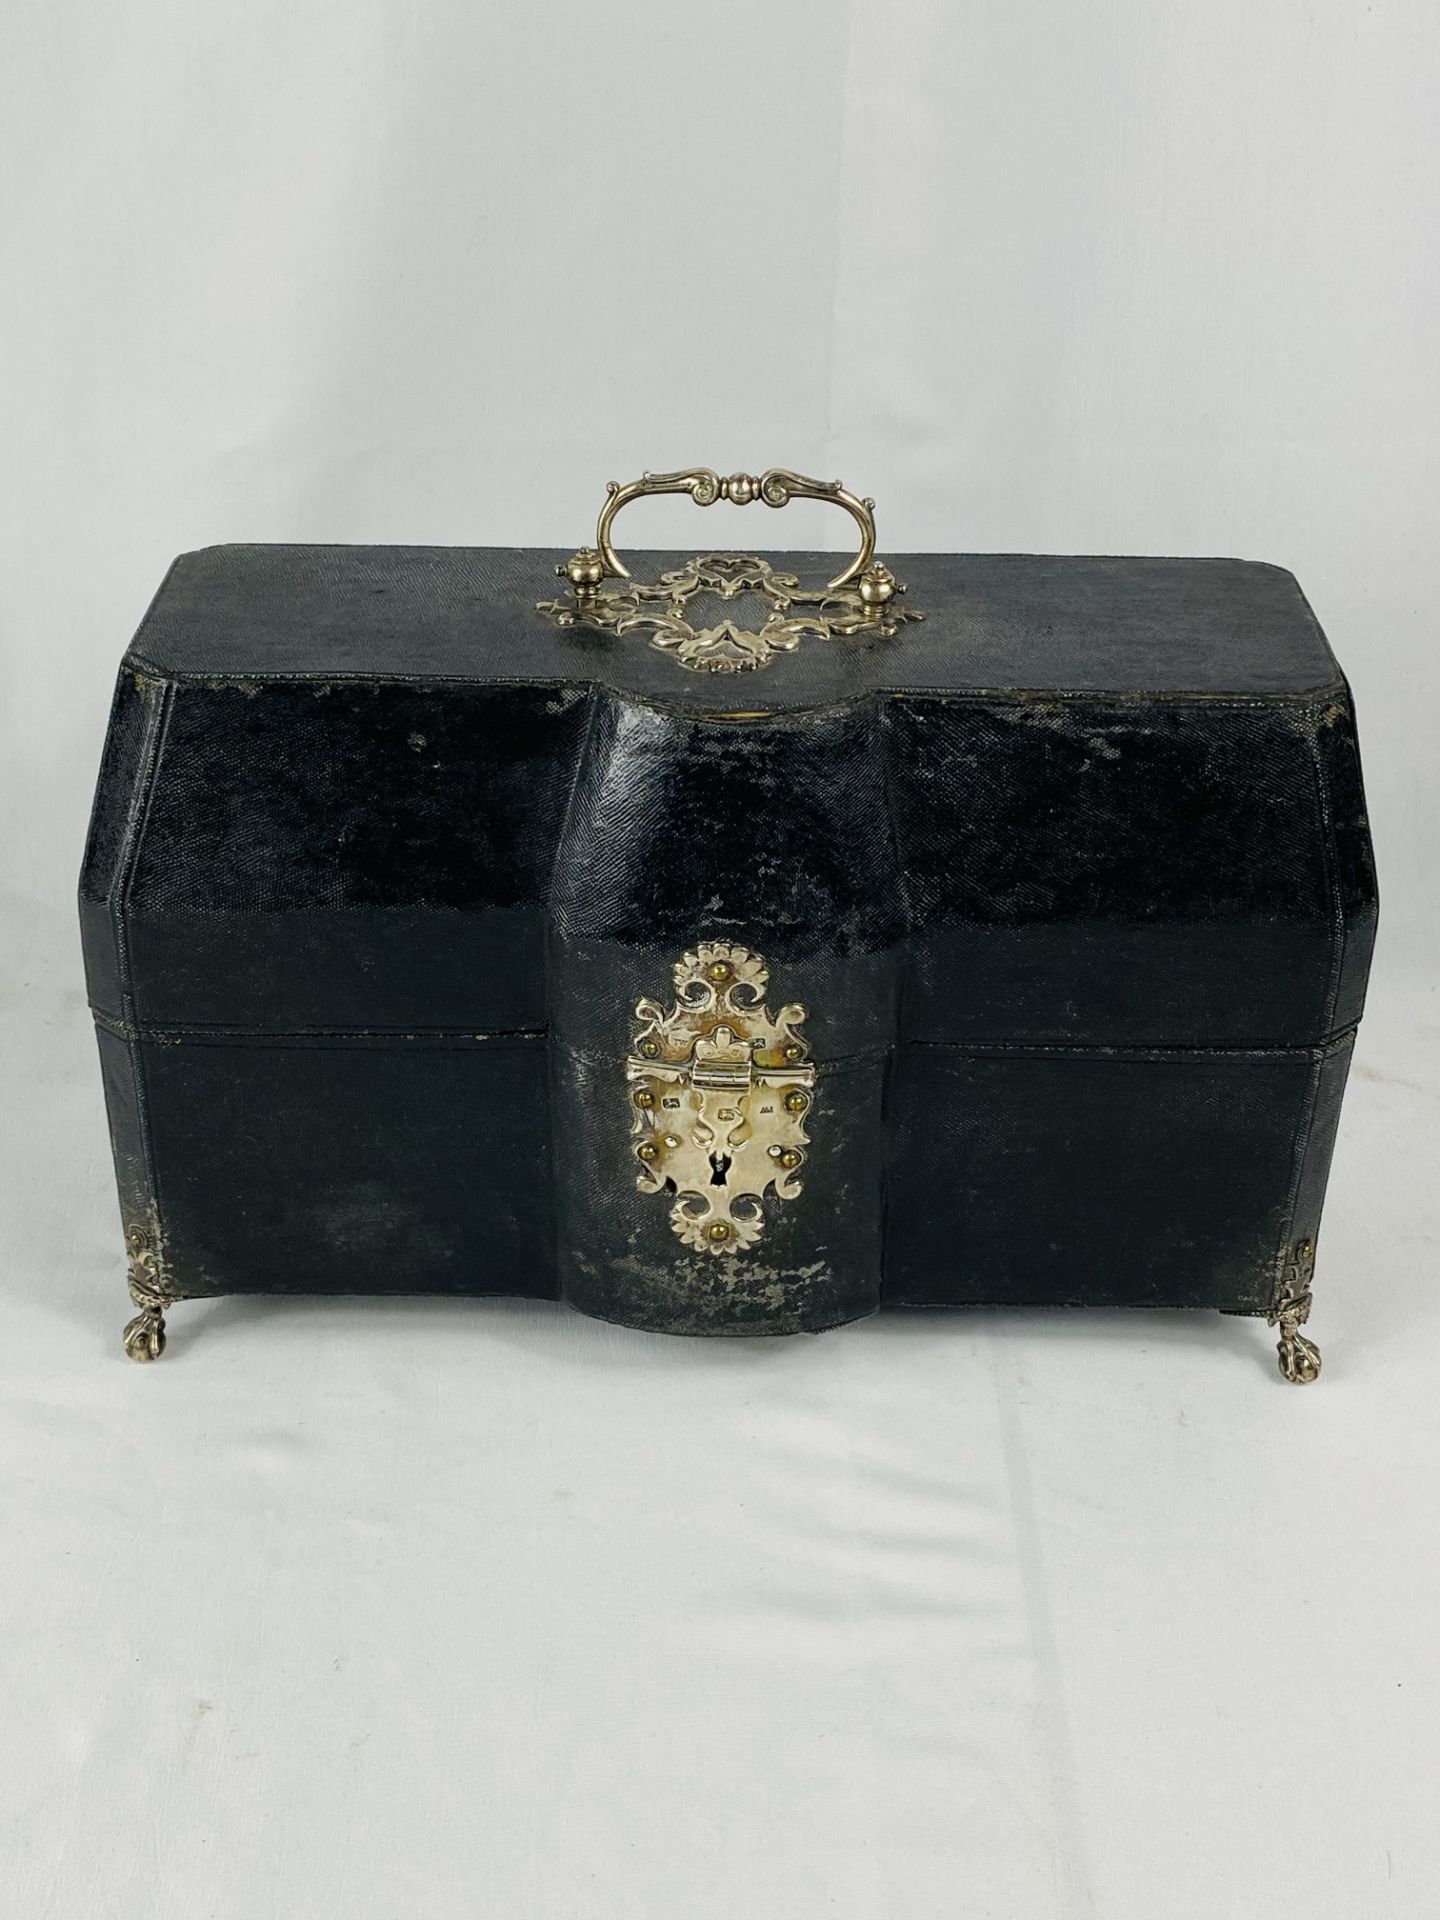 19th century bottle case with silver escutcheon and handle, - Image 2 of 3